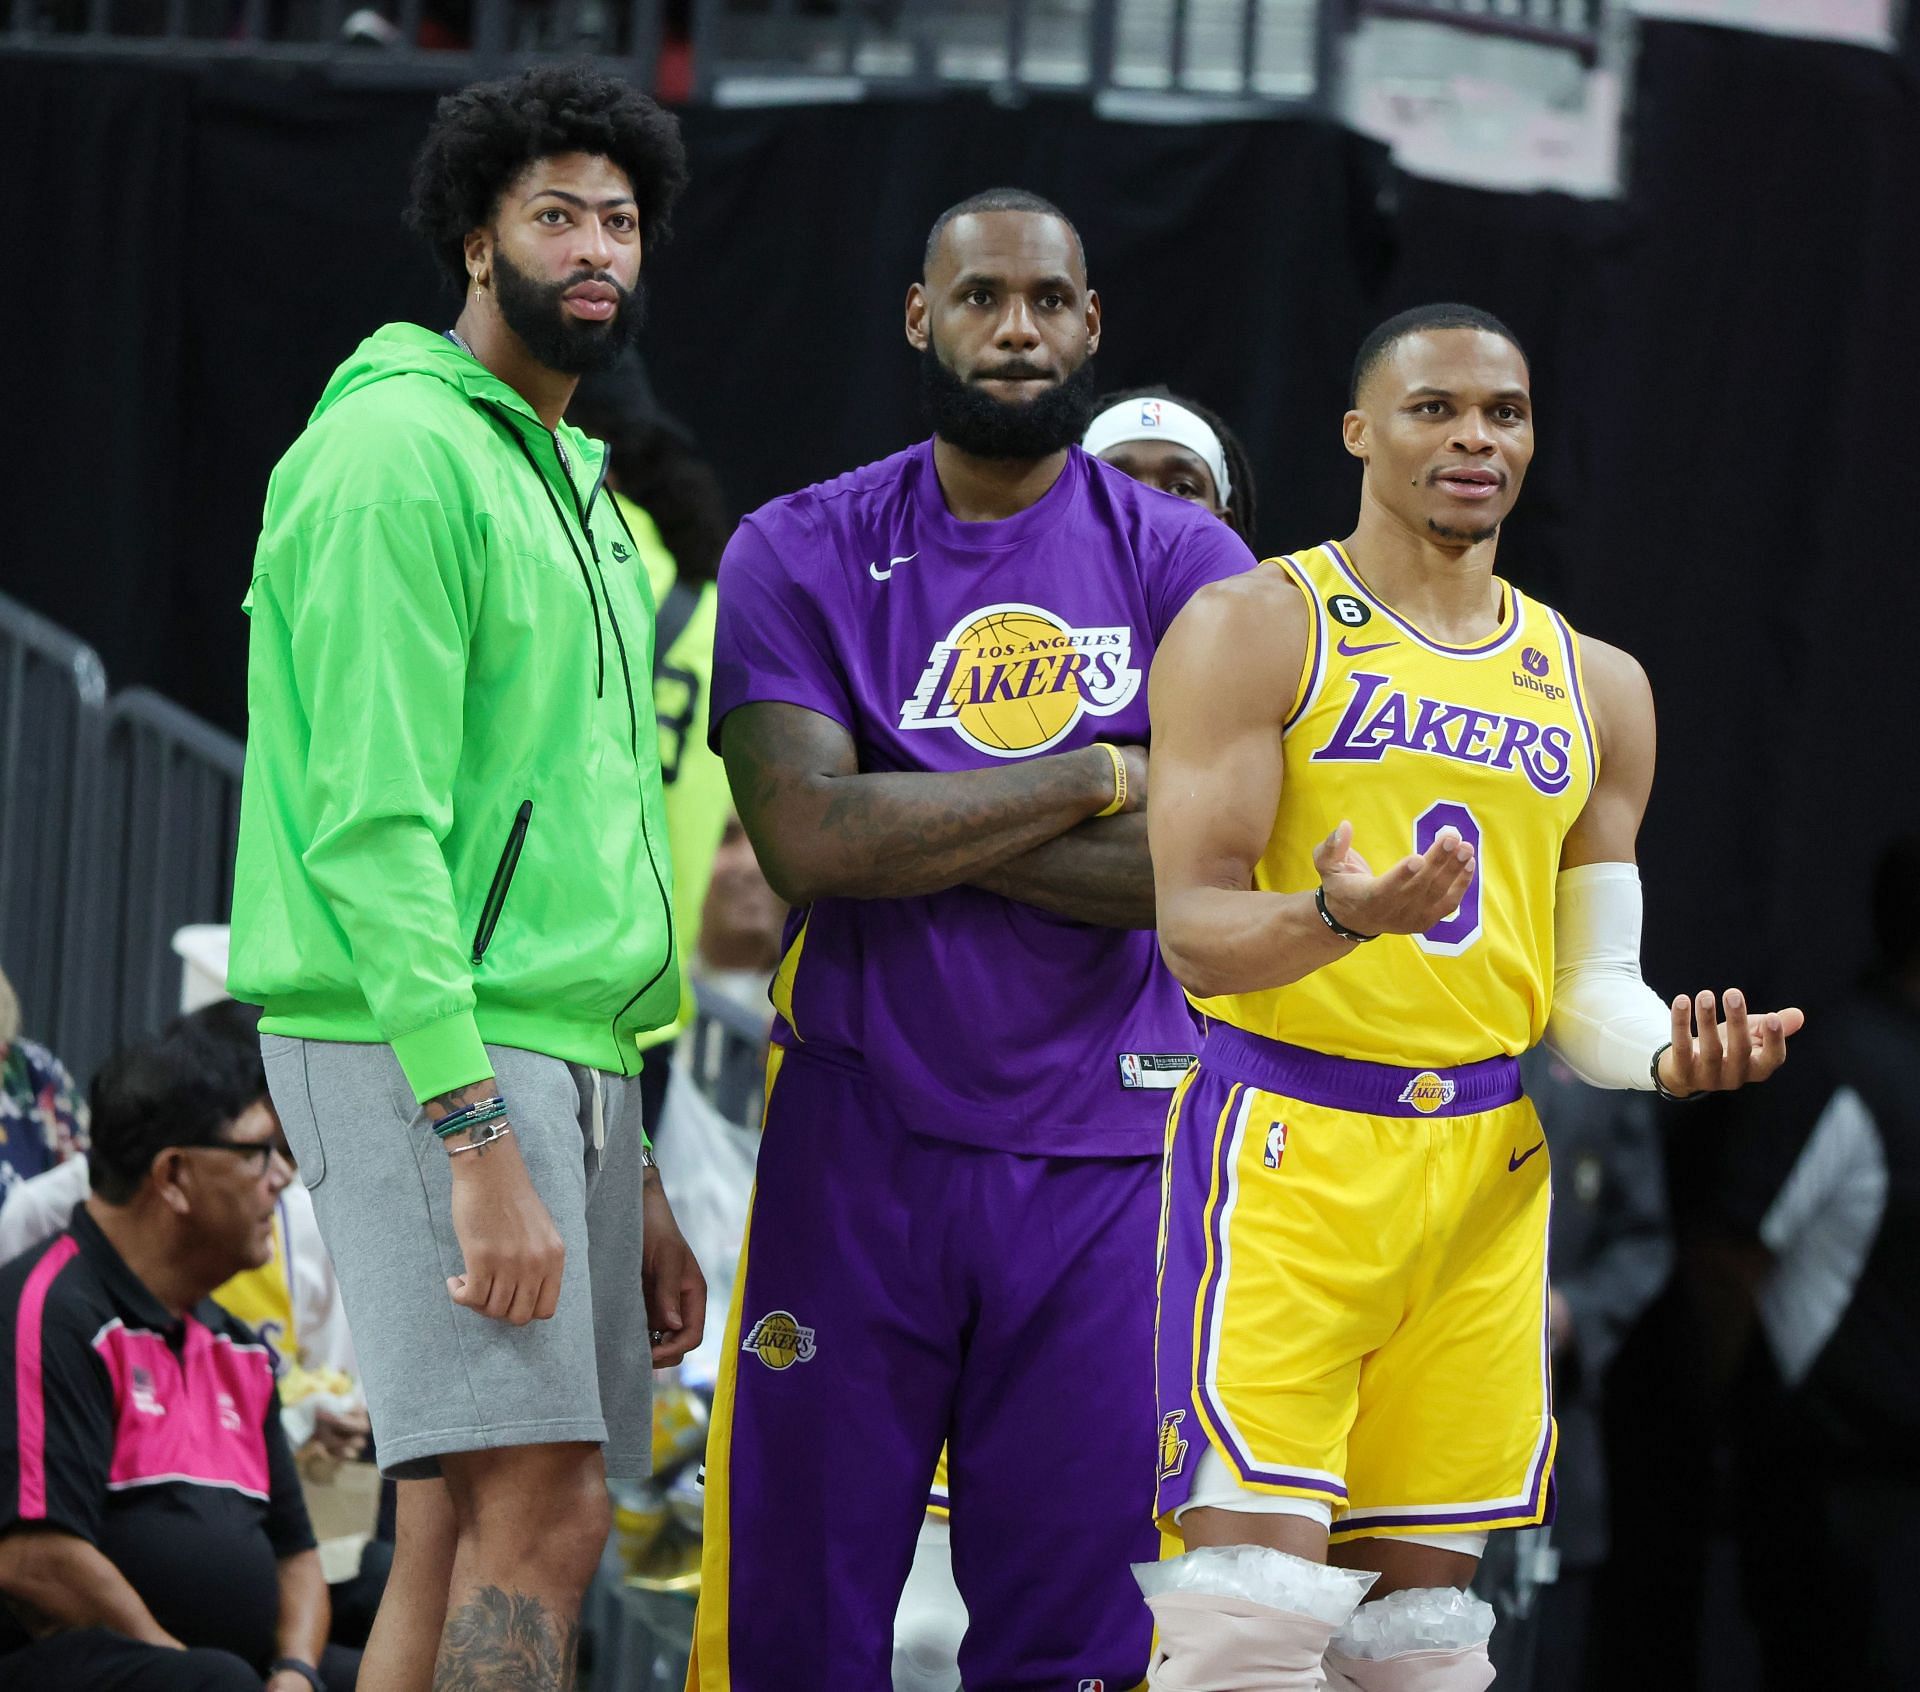 Experts in adversity, the Lakers prepare (again) for closeout Game